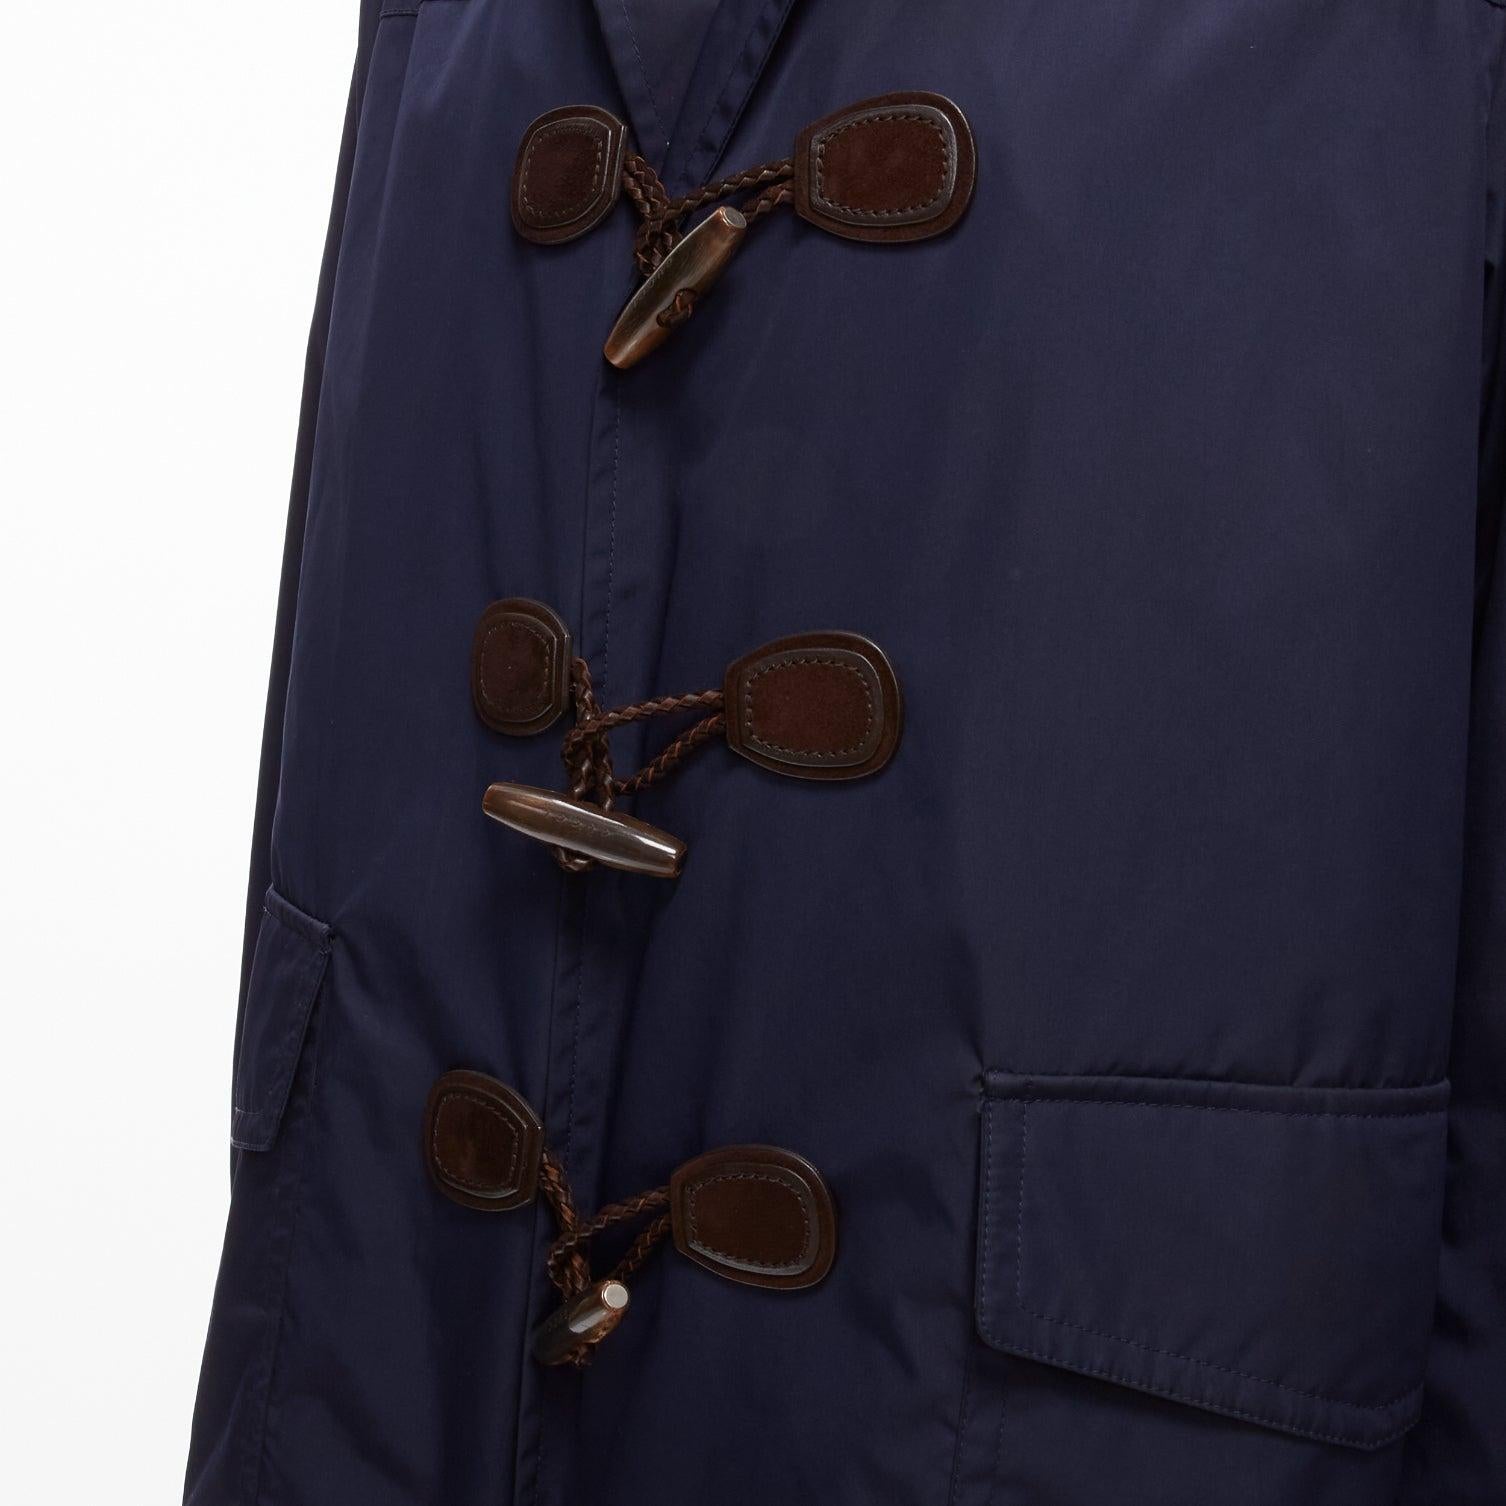 GUCCI 2012 navy nylon brown toggle hooded anorak jacket coat IT48 M
Reference: JSLE/A00022
Brand: Gucci
Collection: 2012
Material: Nylon, Leather
Color: Navy, Brown
Pattern: Solid
Closure: Button
Lining: Black Fabric
Made in: